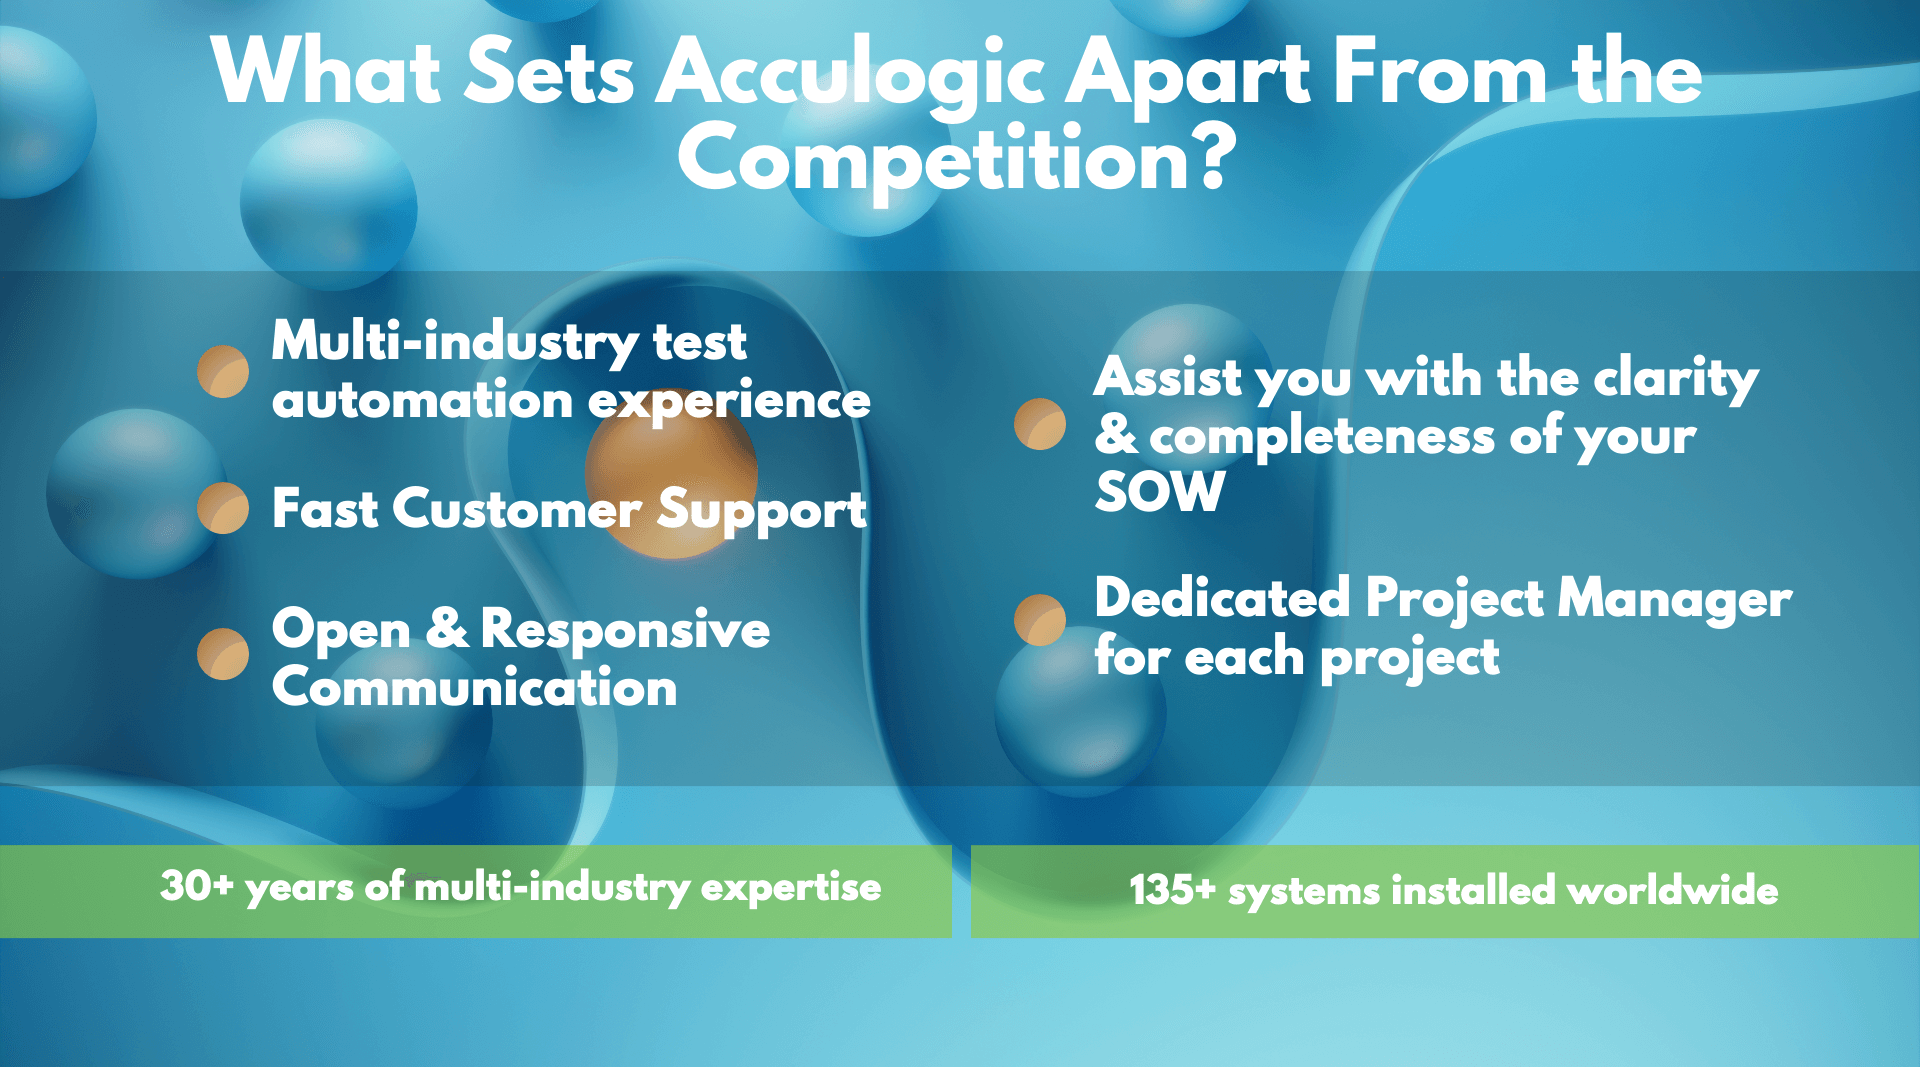 acculogic apart from competition